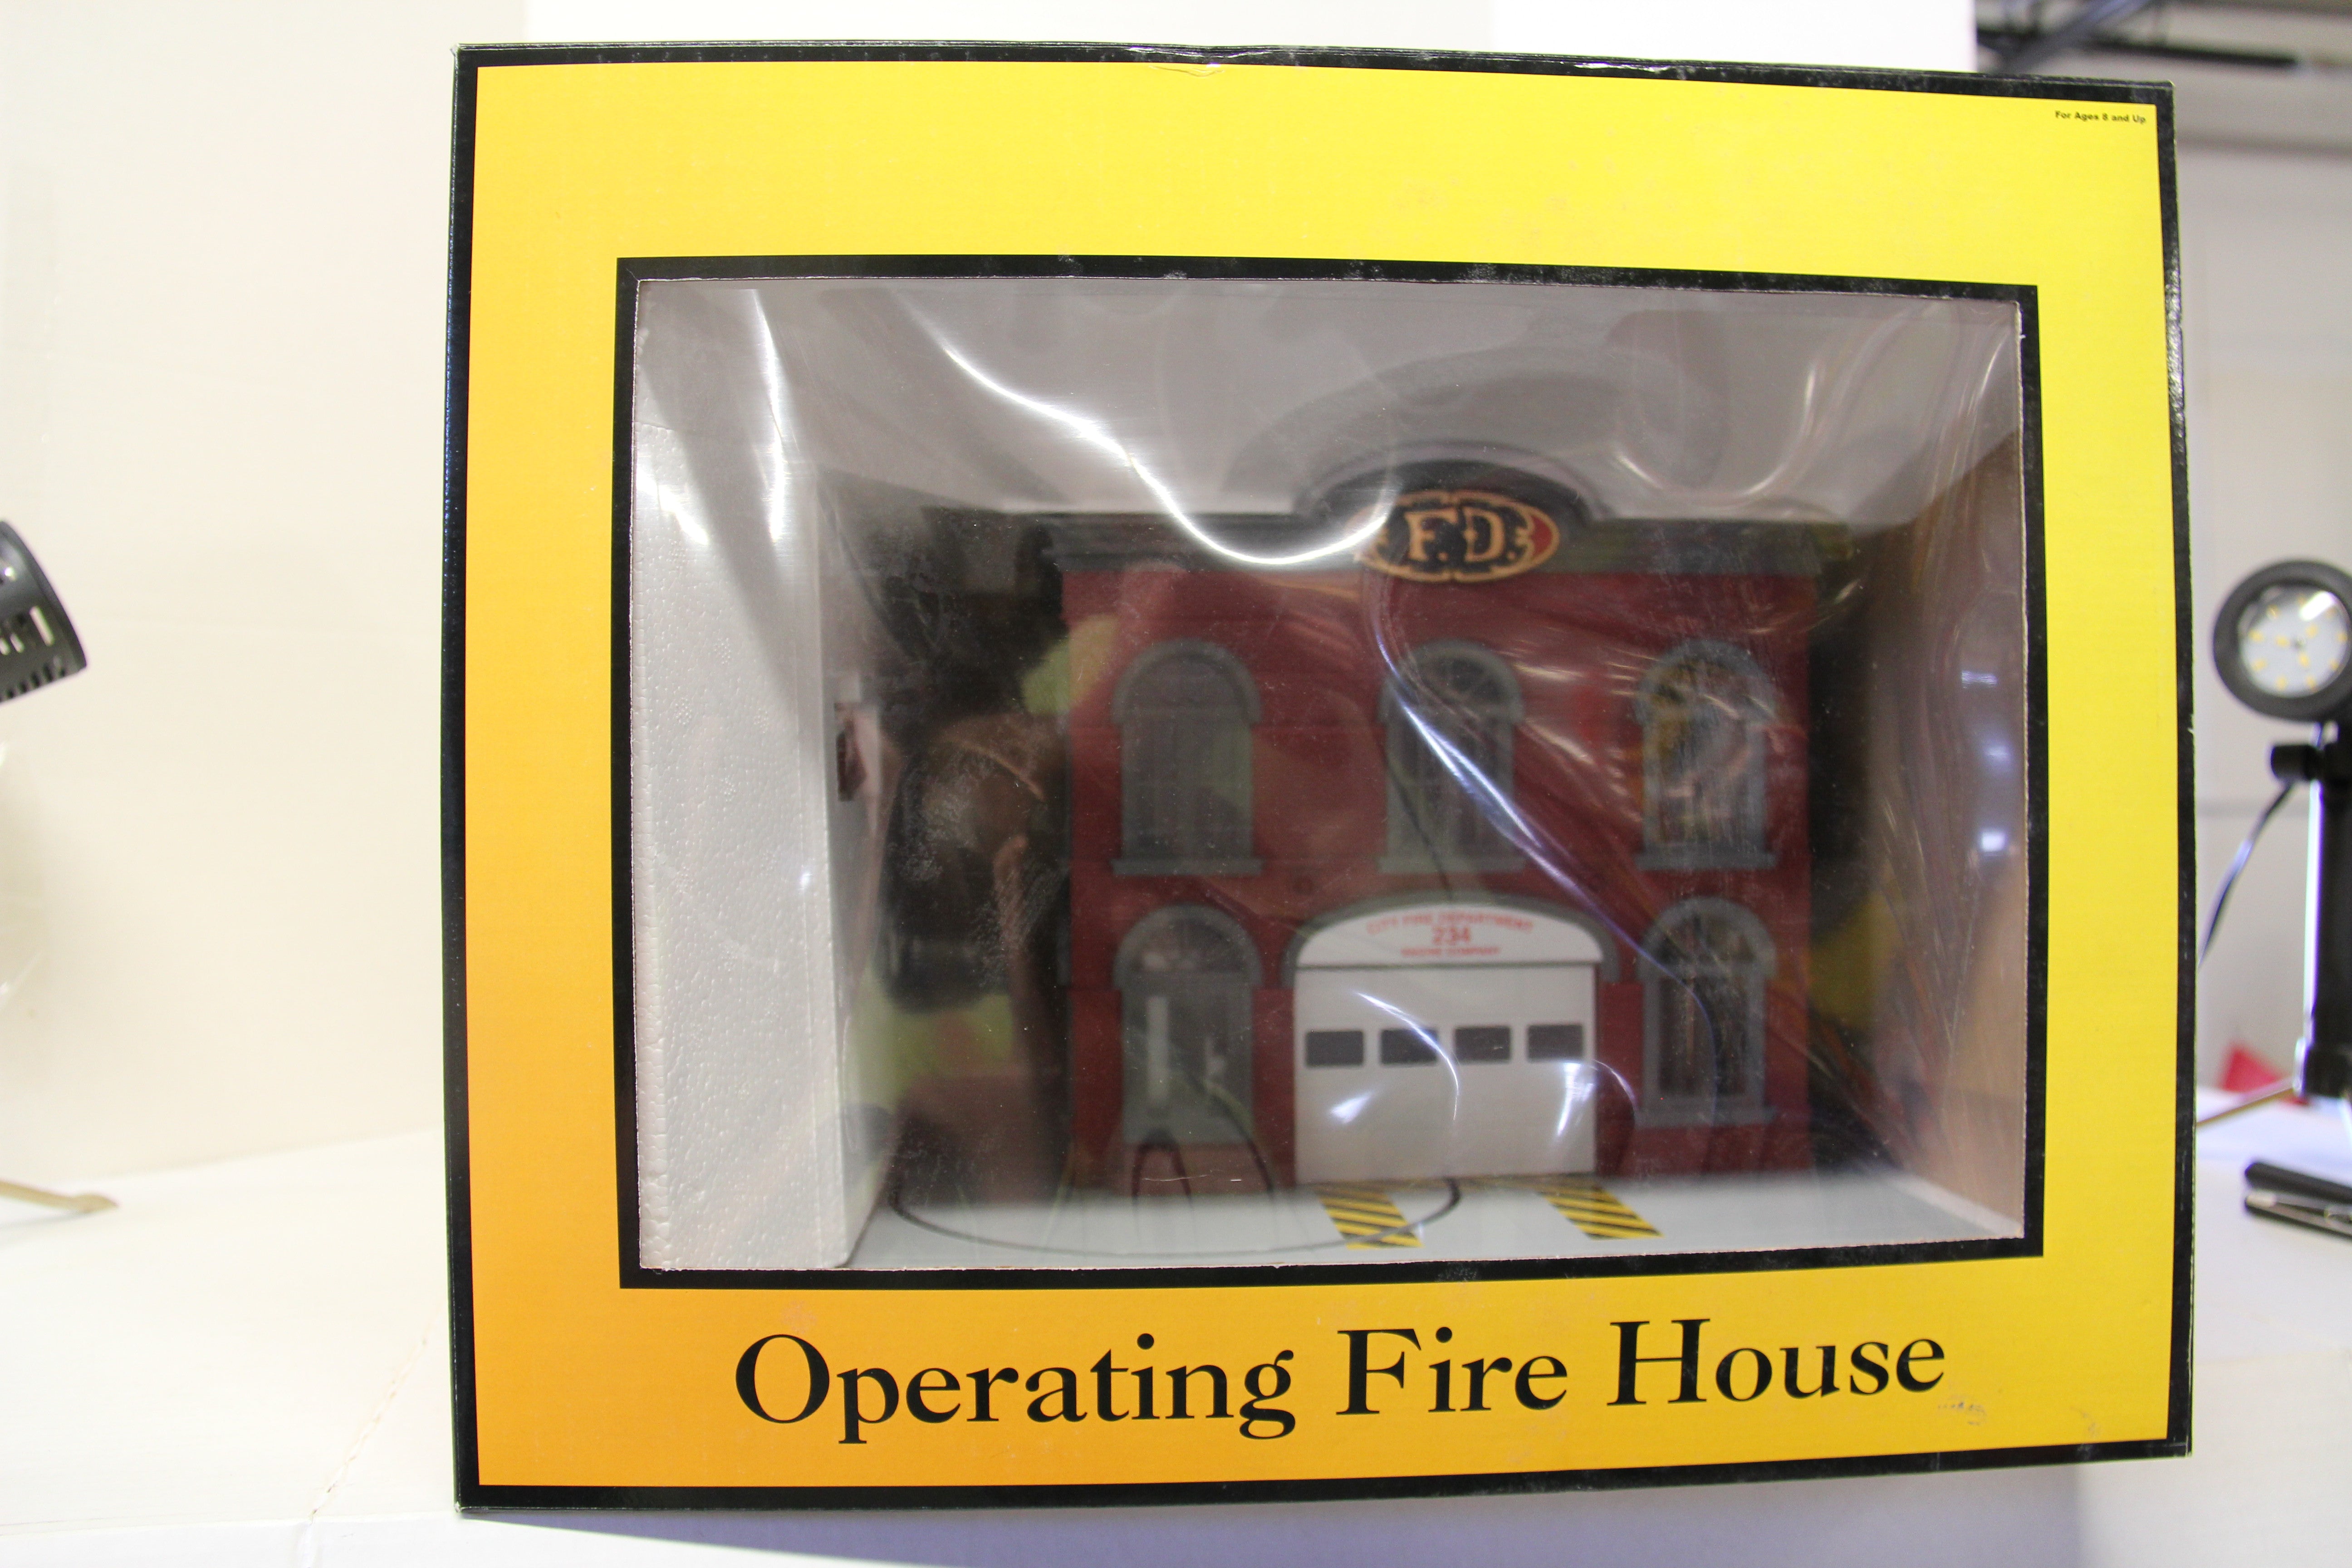 Rail King 30-9102 Operating Fire House-Second hand-M4633